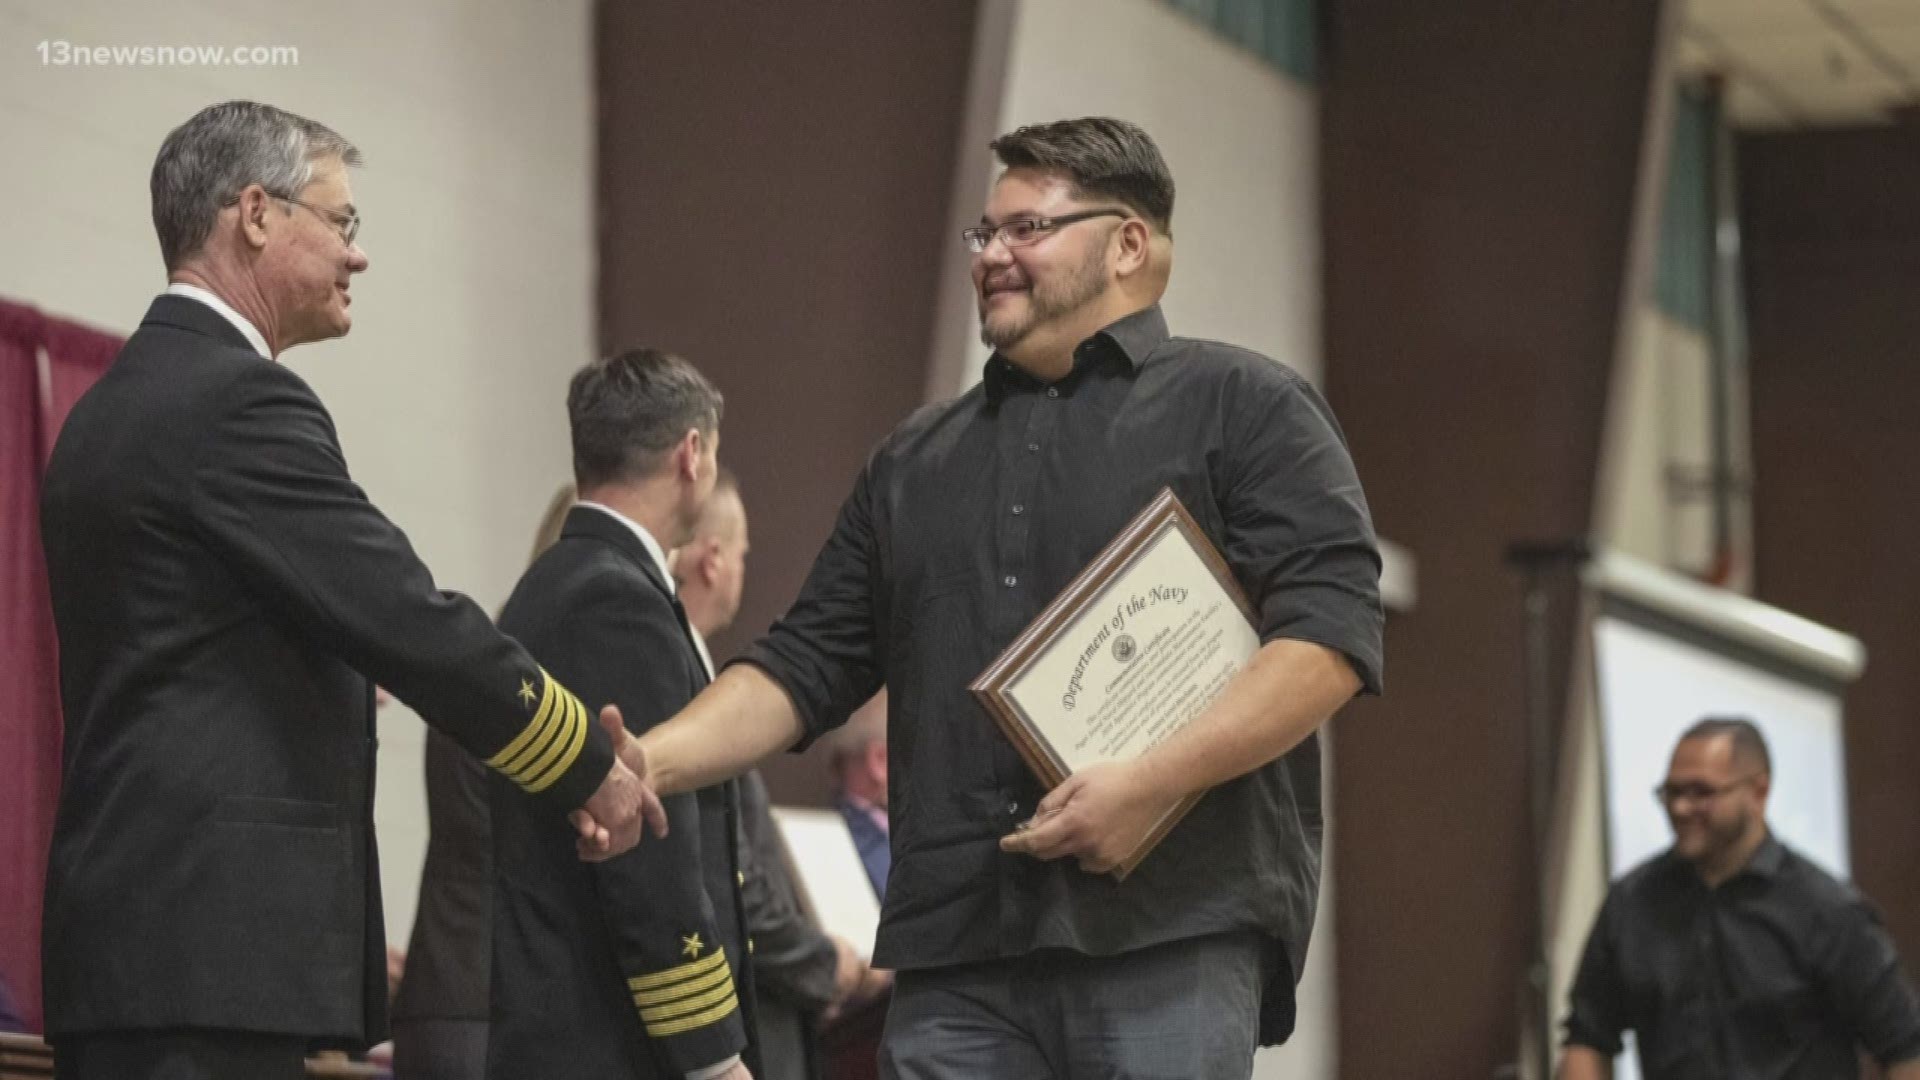 Almost 250 students graduated after completing the four-year training program. The students will received a Technician Career Studies Certificate.